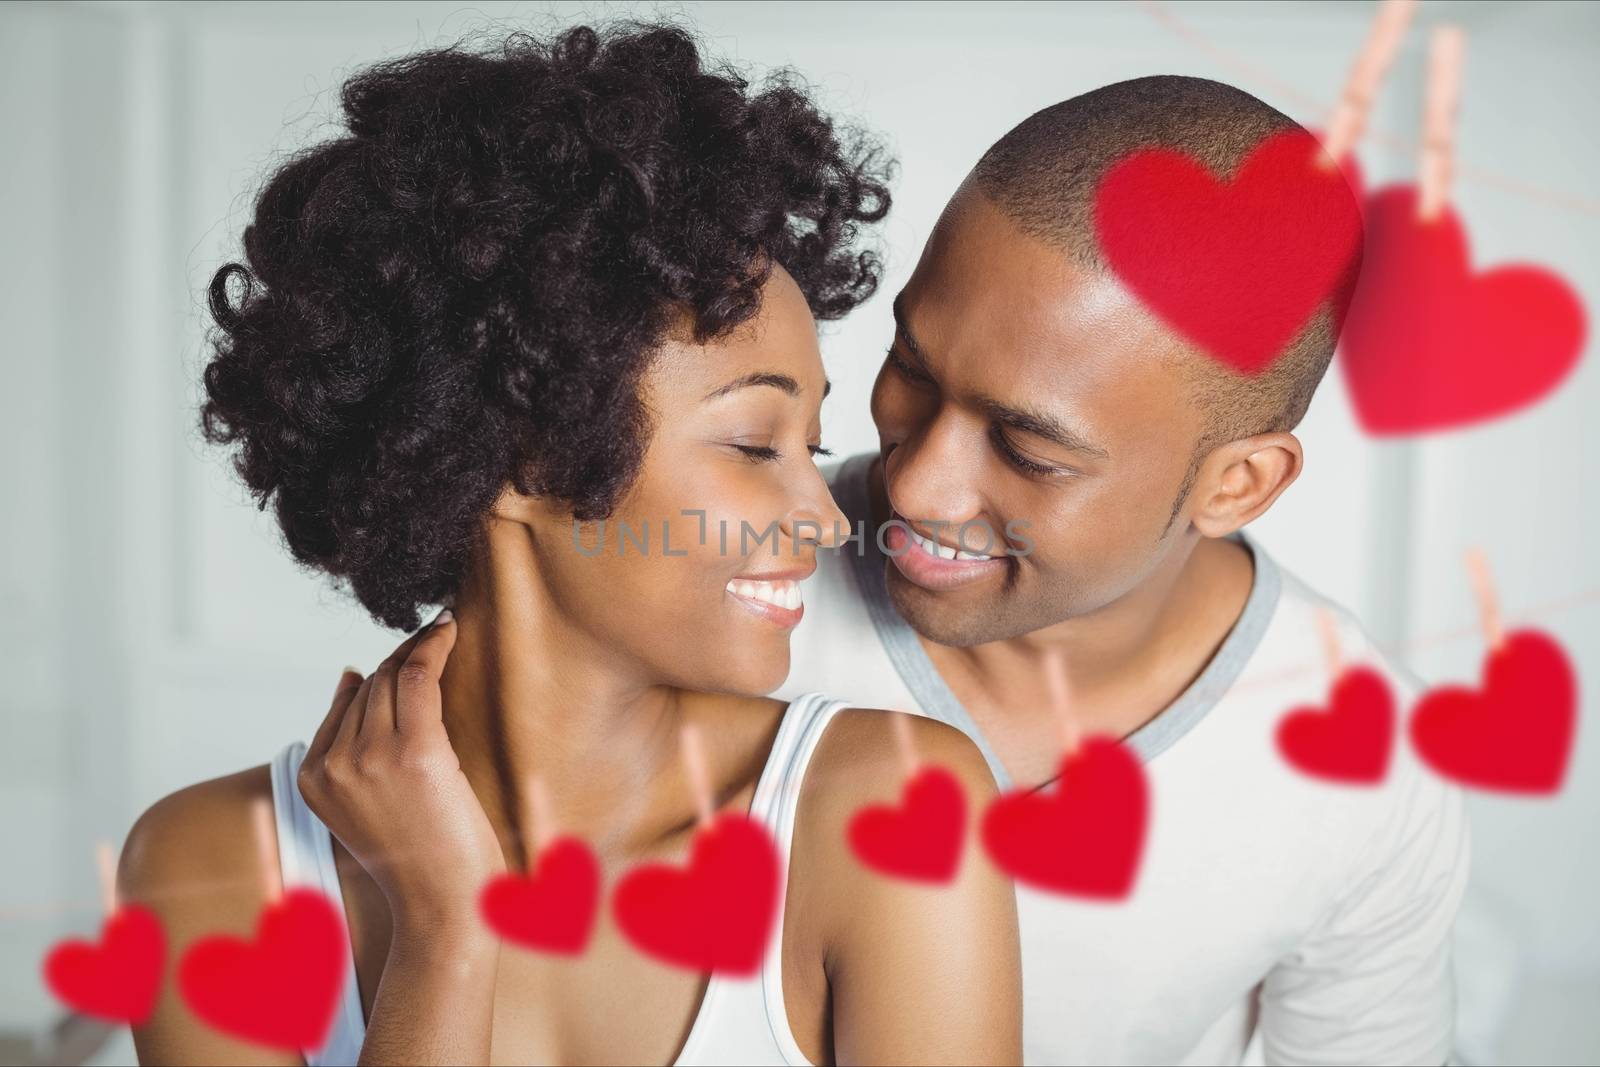 Composite image of romantic couple embracing each other with red hearts hanging on line